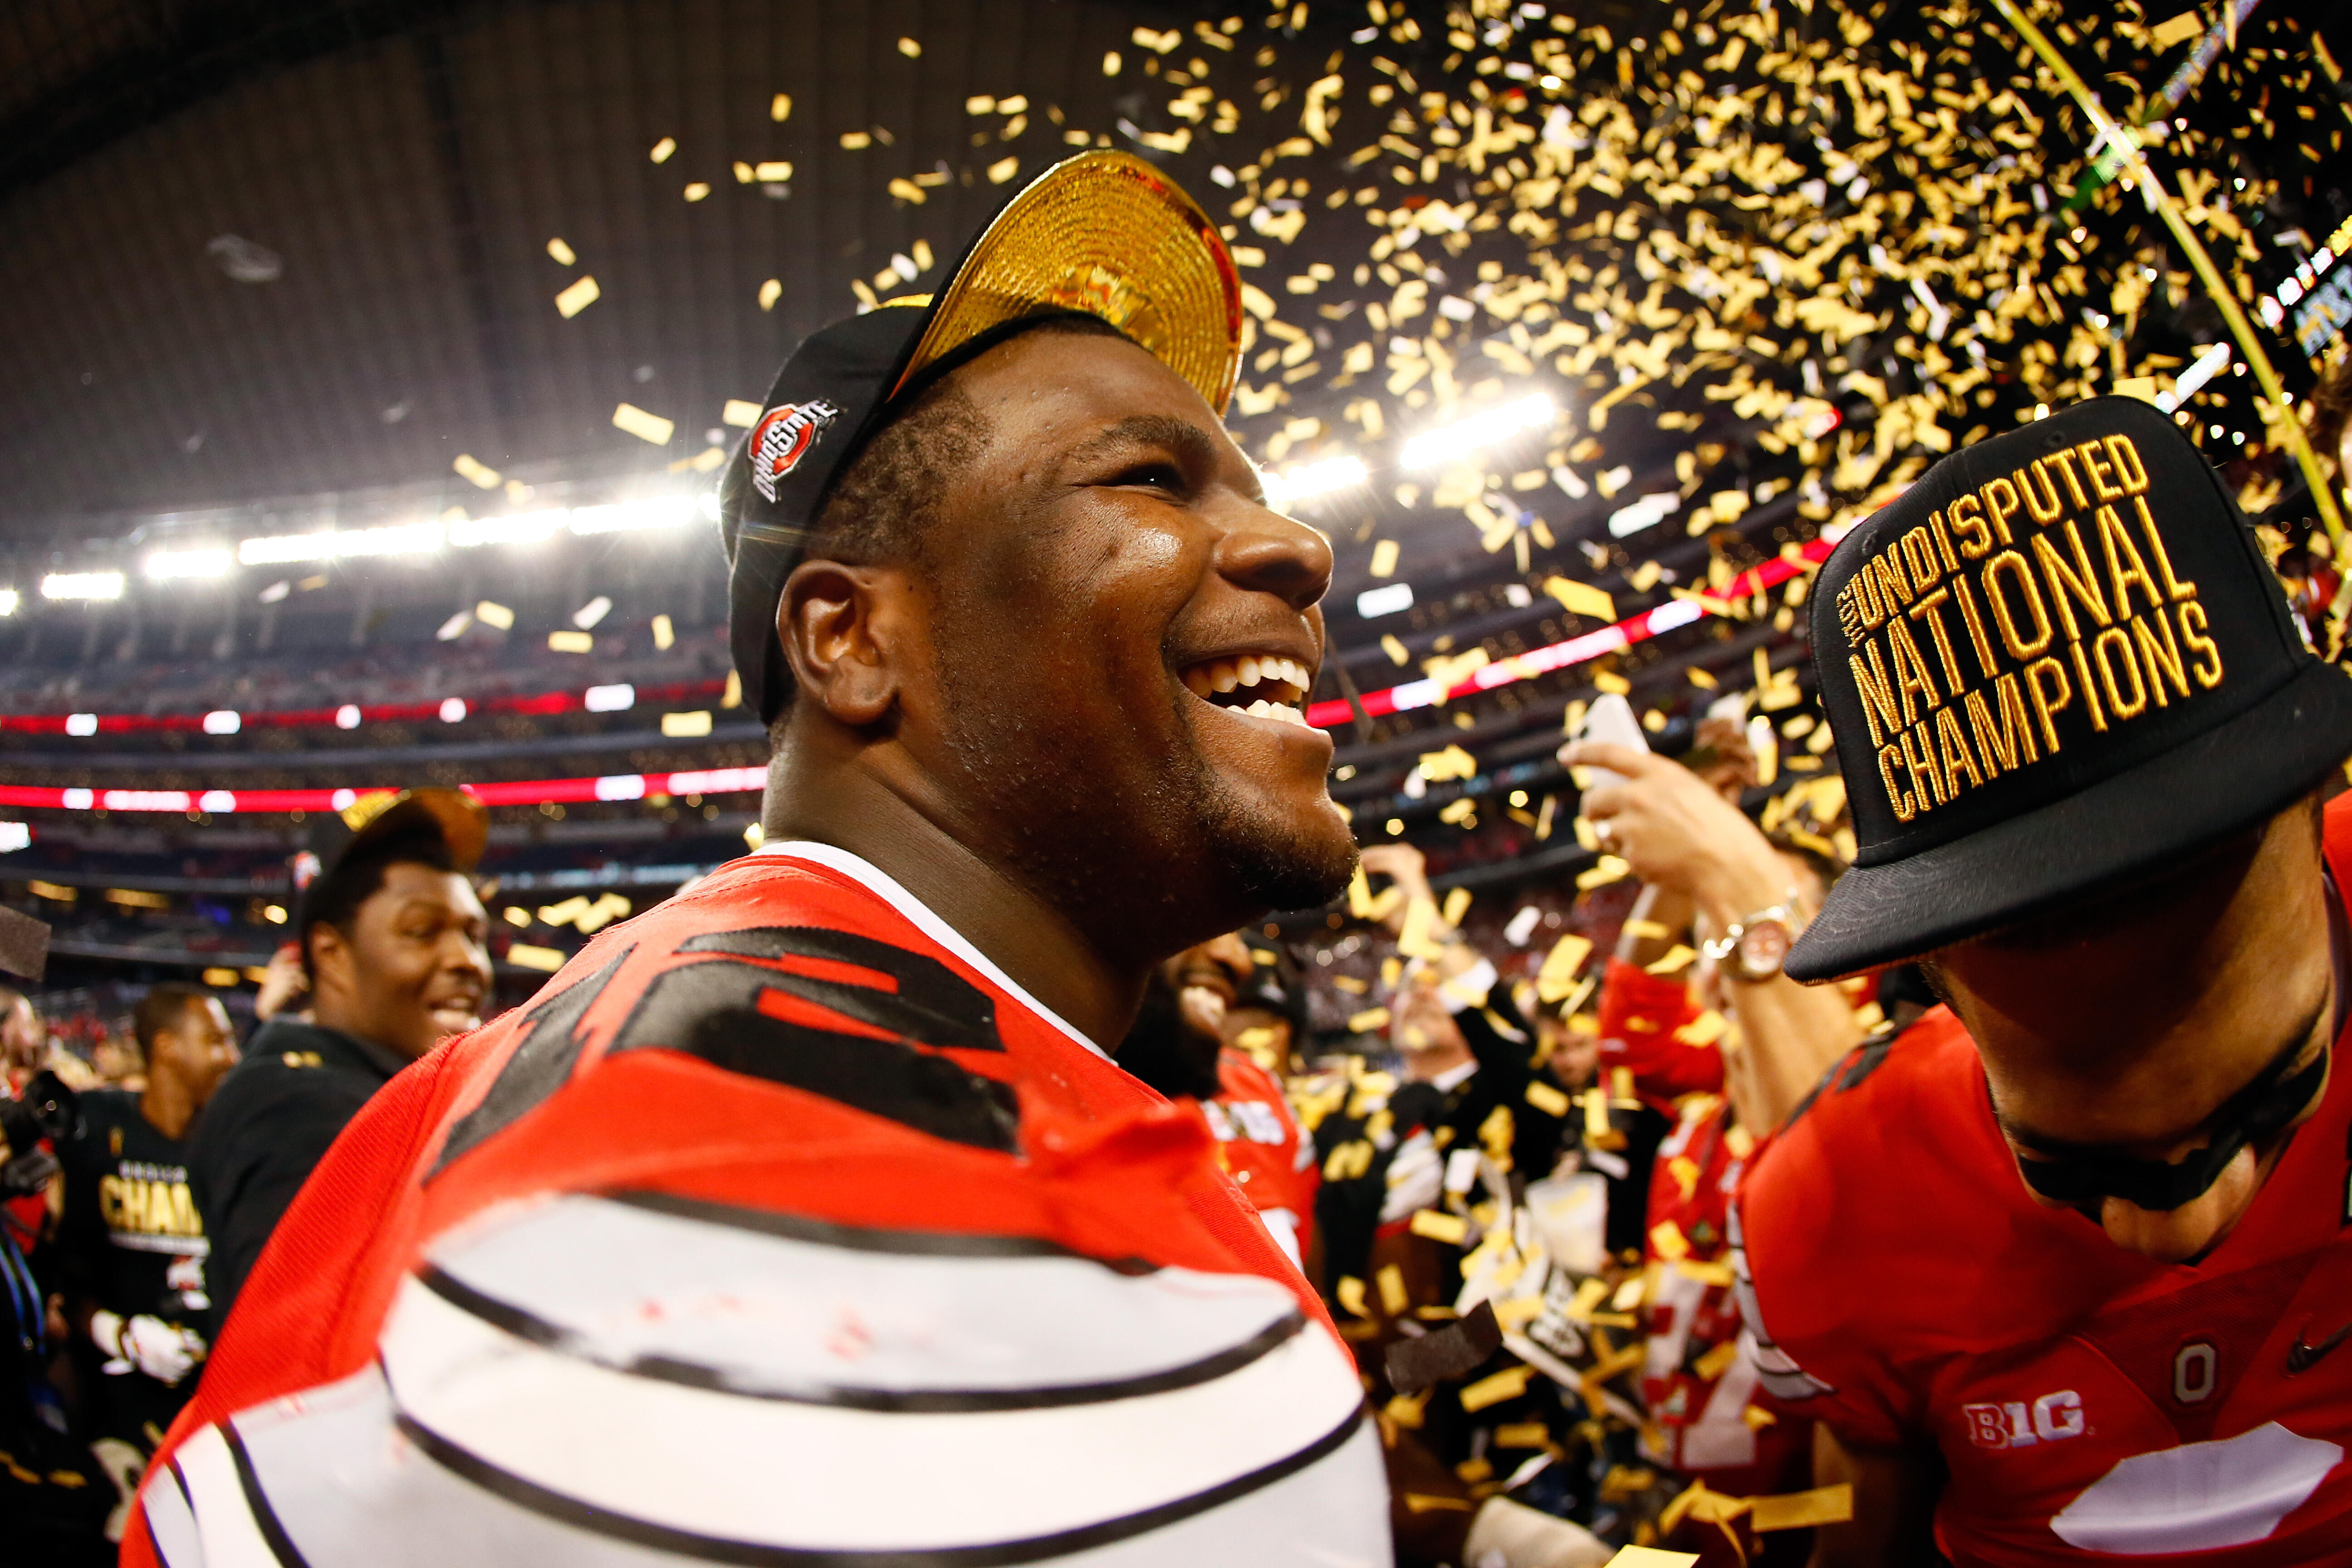 ARLINGTON, TX - JANUARY 12:  Quarterback Cardale Jones #12 of the Ohio State Buckeyes celebrates after defeating the Oregon Ducks 42 to 20 in the College Football Playoff National Championship Game at AT&T Stadium on January 12, 2015 in Arlington, Texas. 